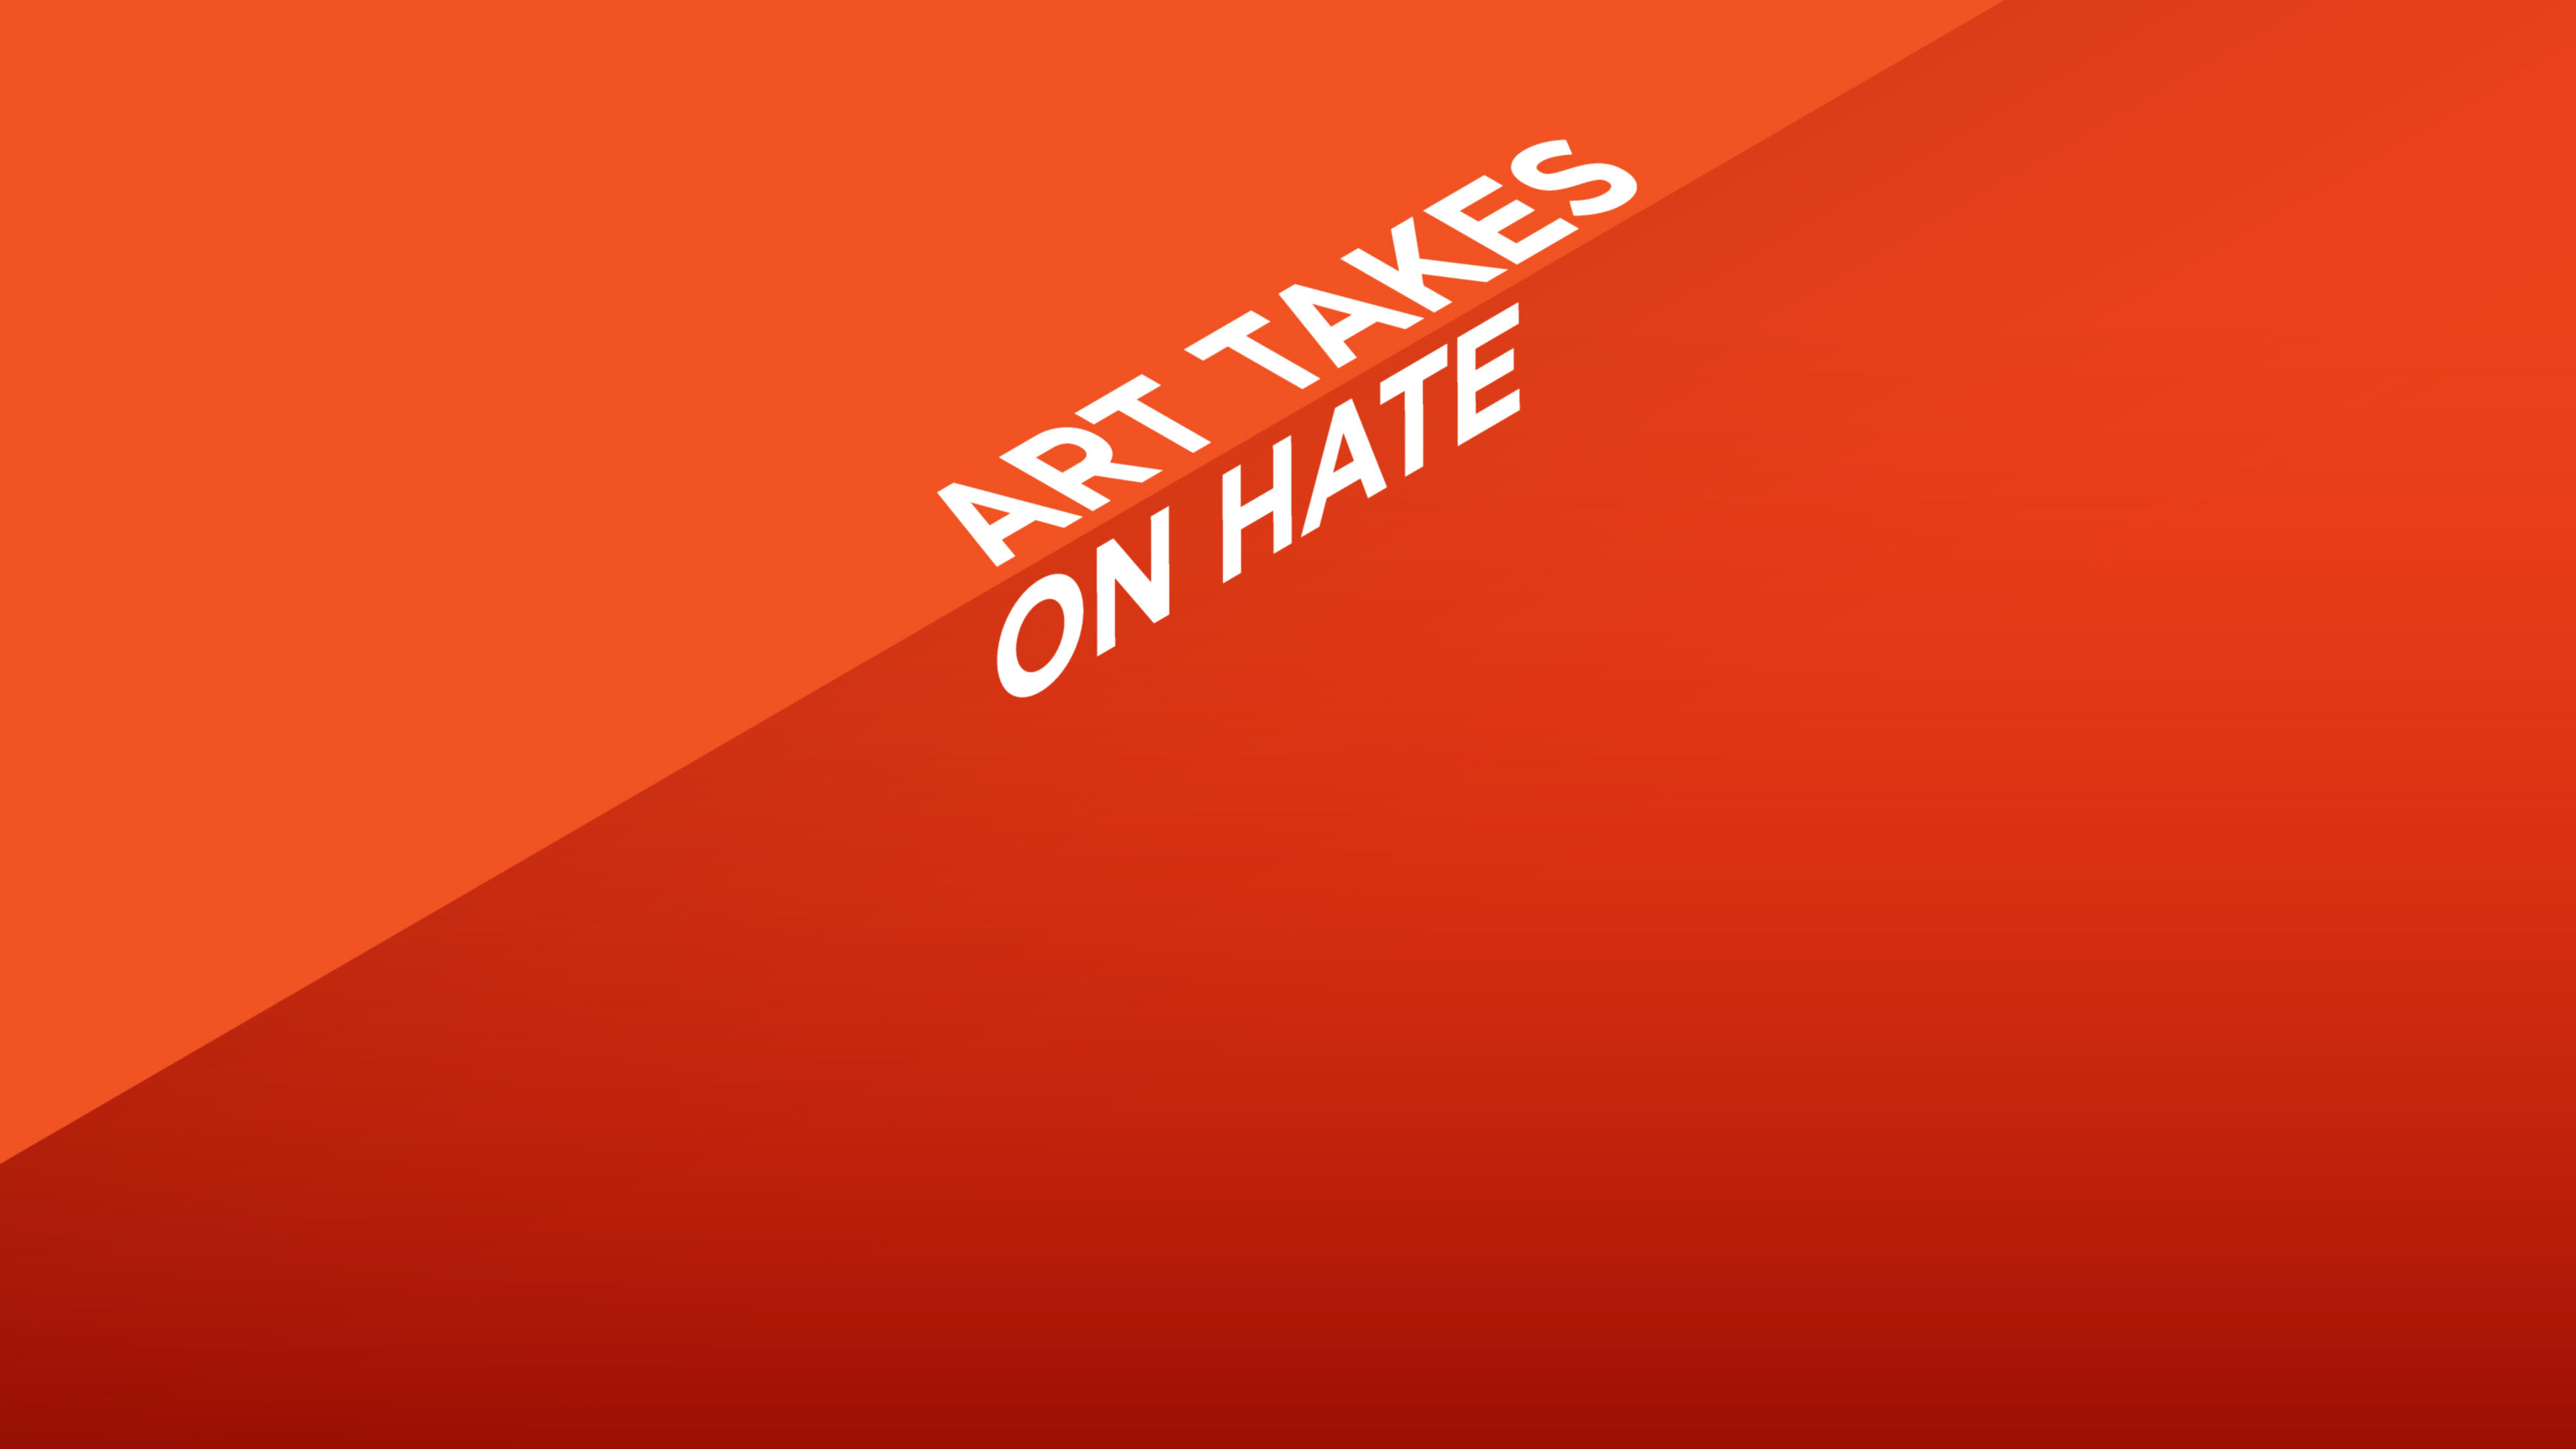 "Art Takes On Hate" is uppercase, riding along a shadow edge and a full-bleed background.